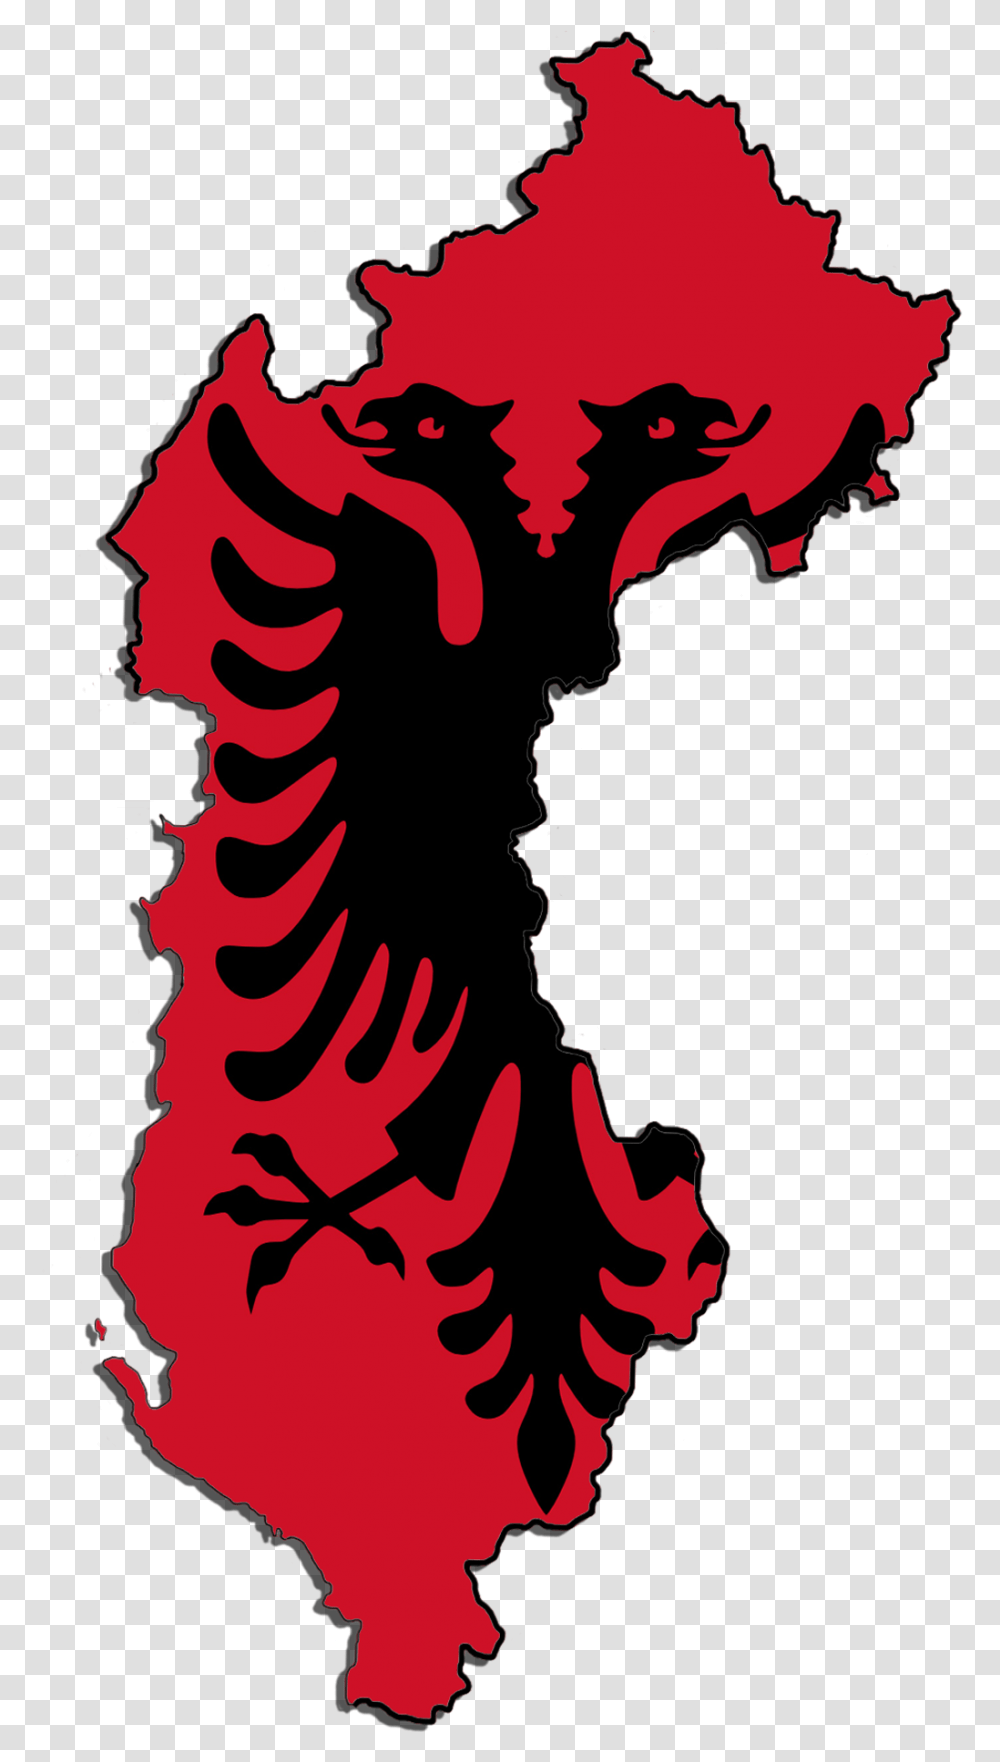 A Order Of Google Inc Albania And Kosovo Map Clipart Kosovo Is Albania Map, Poster, Mammal, Animal, Seahorse Transparent Png